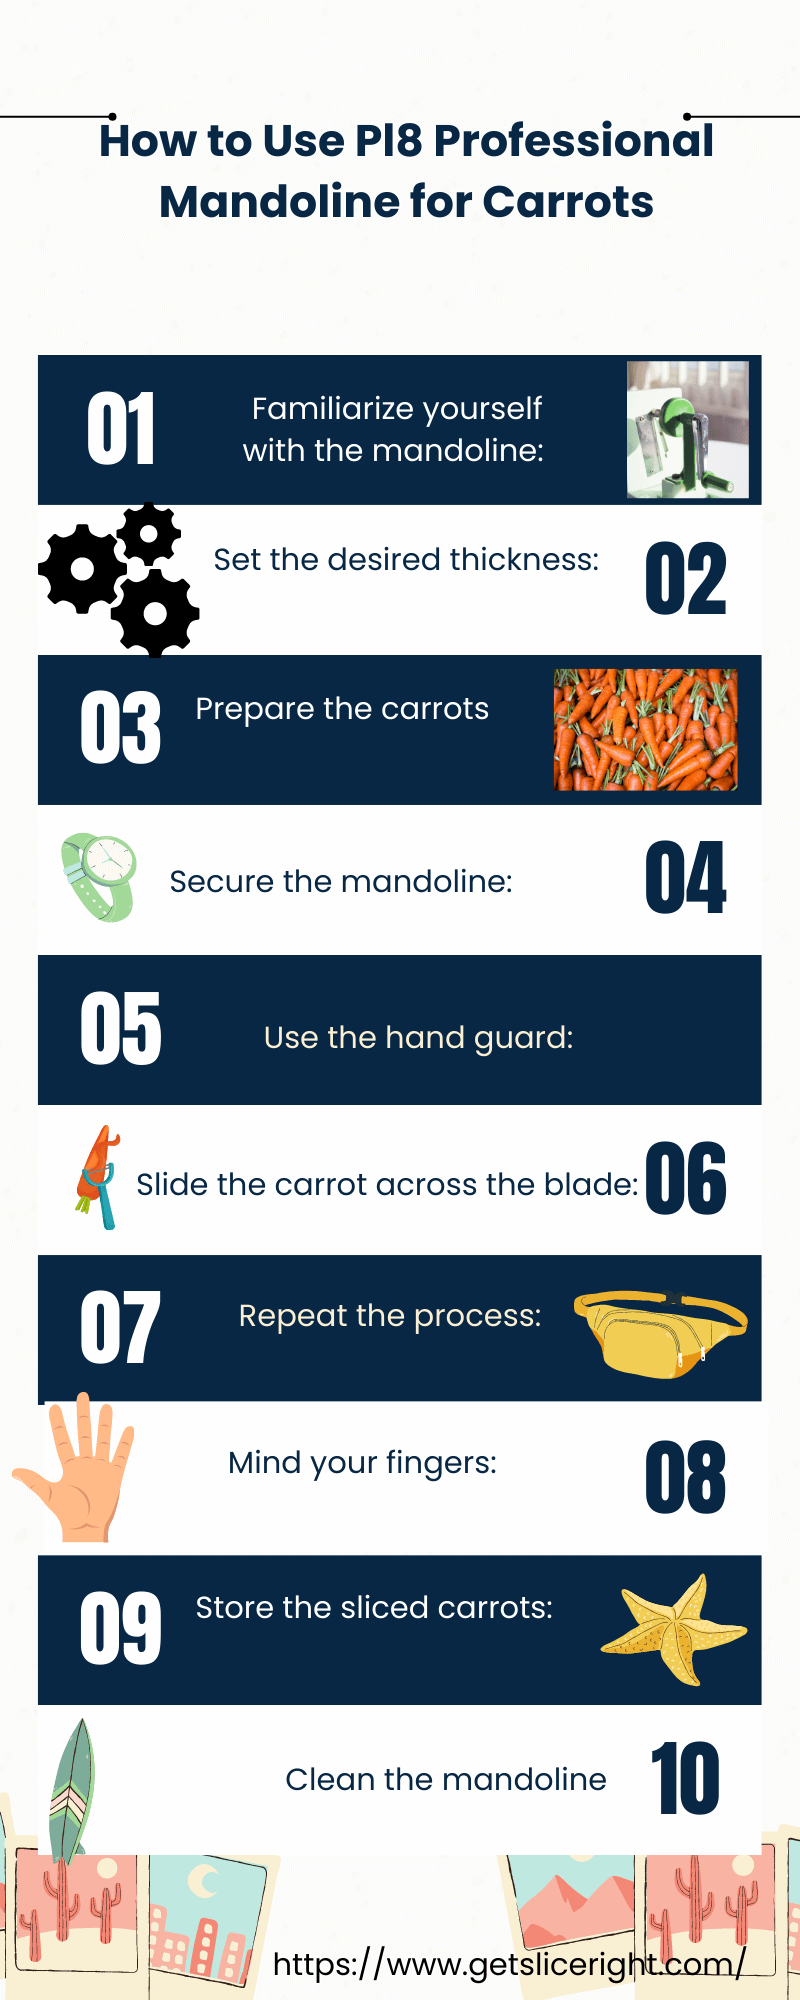 How to use a PI8 professional mandoline for carrots - Getsliceright Infographic